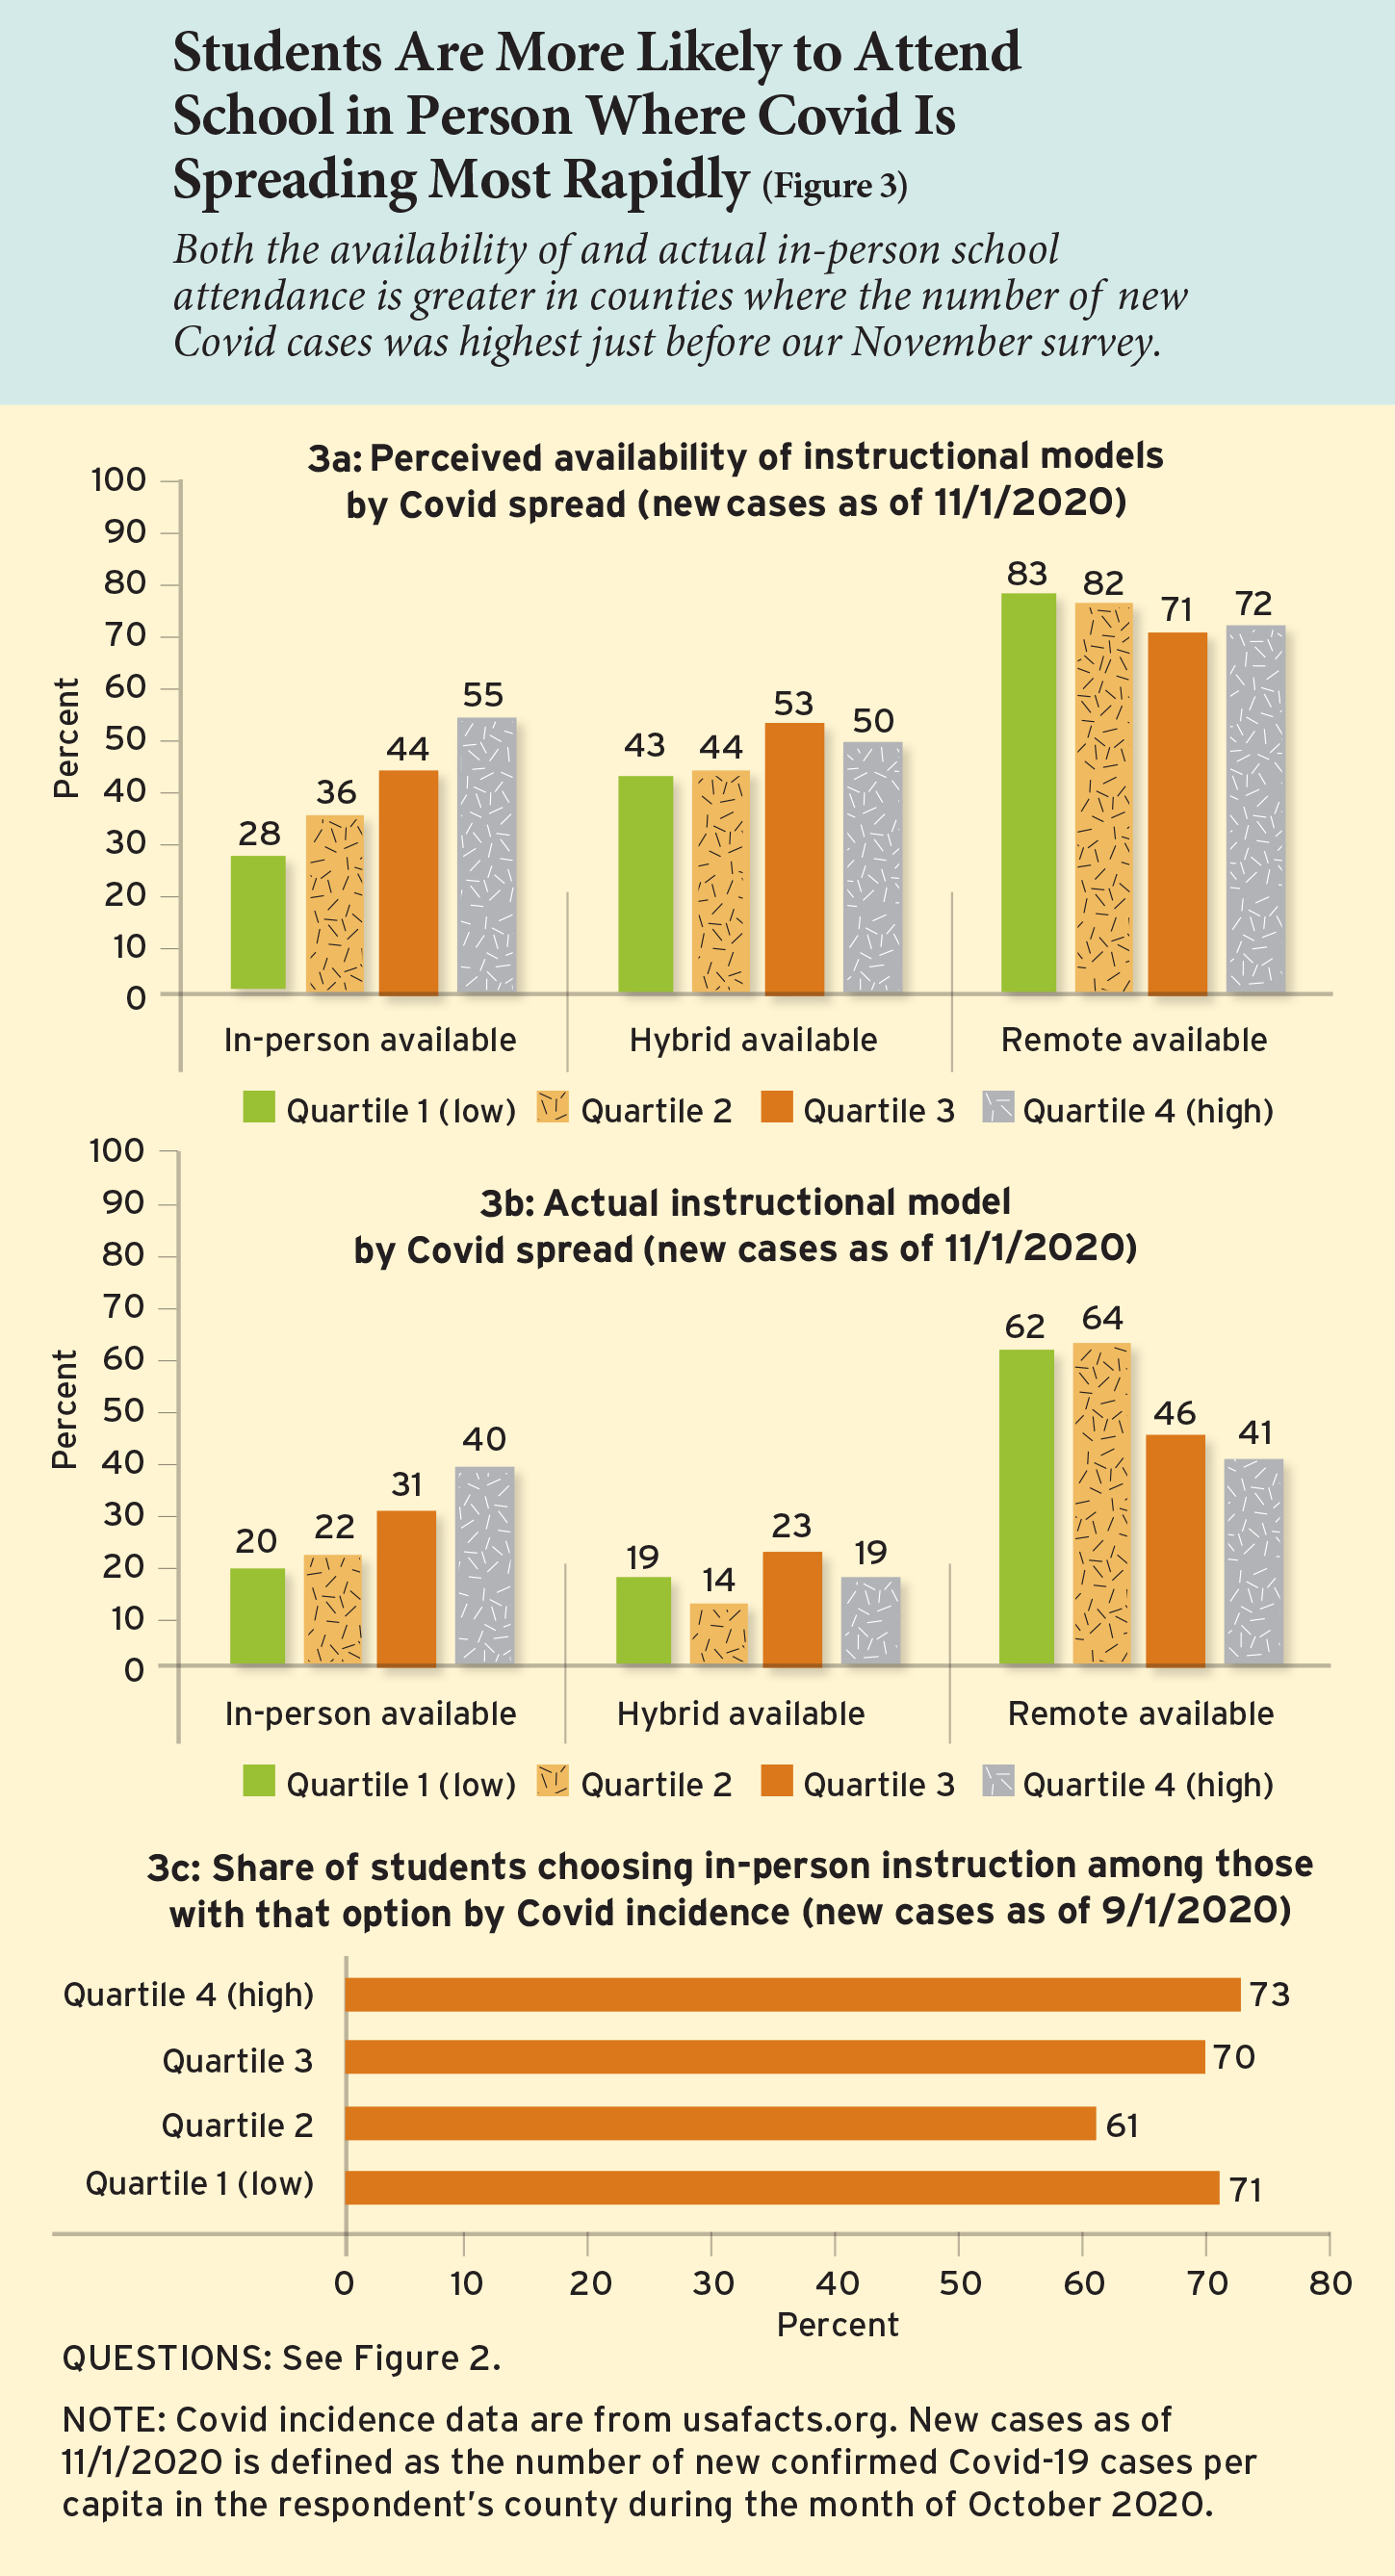 Students Are More Likely to Attend School in Person Where Covid Is Spreading Most Rapidly (Figure 3)